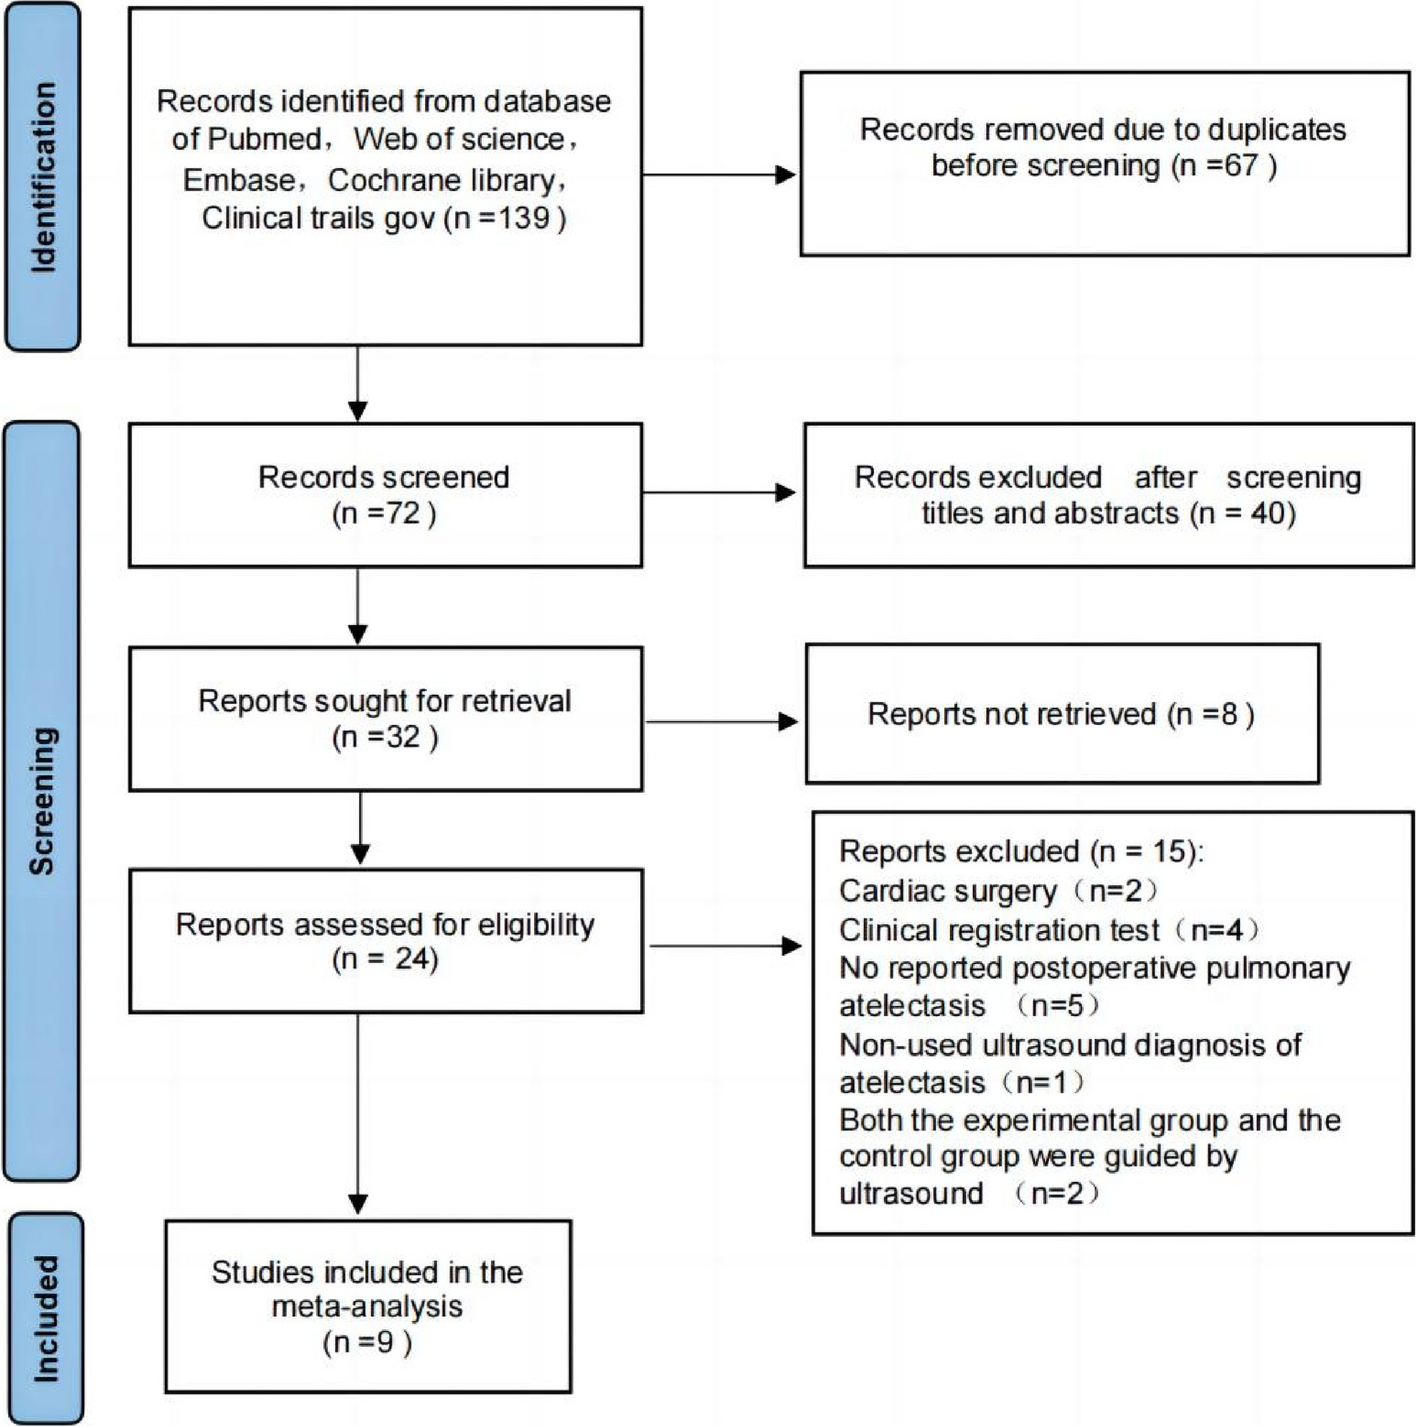 Effect of ultrasound-guided lung recruitment to reduce pulmonary atelectasis after non-cardiac surgery under general anesthesia: a systematic review and meta-analysis of randomized controlled trials